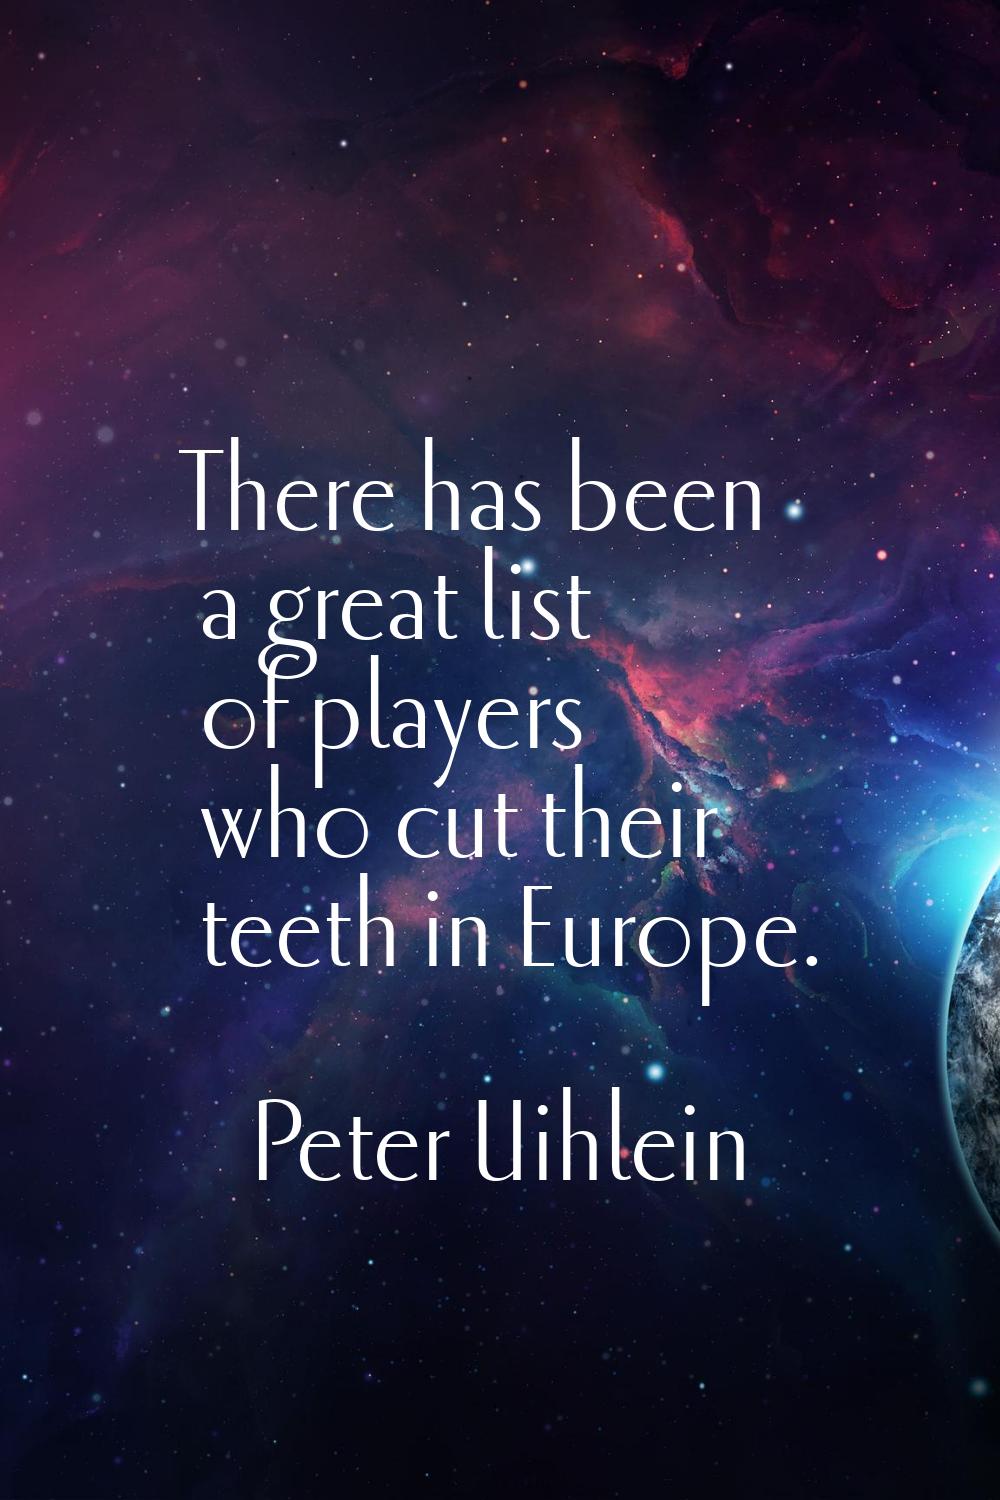 There has been a great list of players who cut their teeth in Europe.